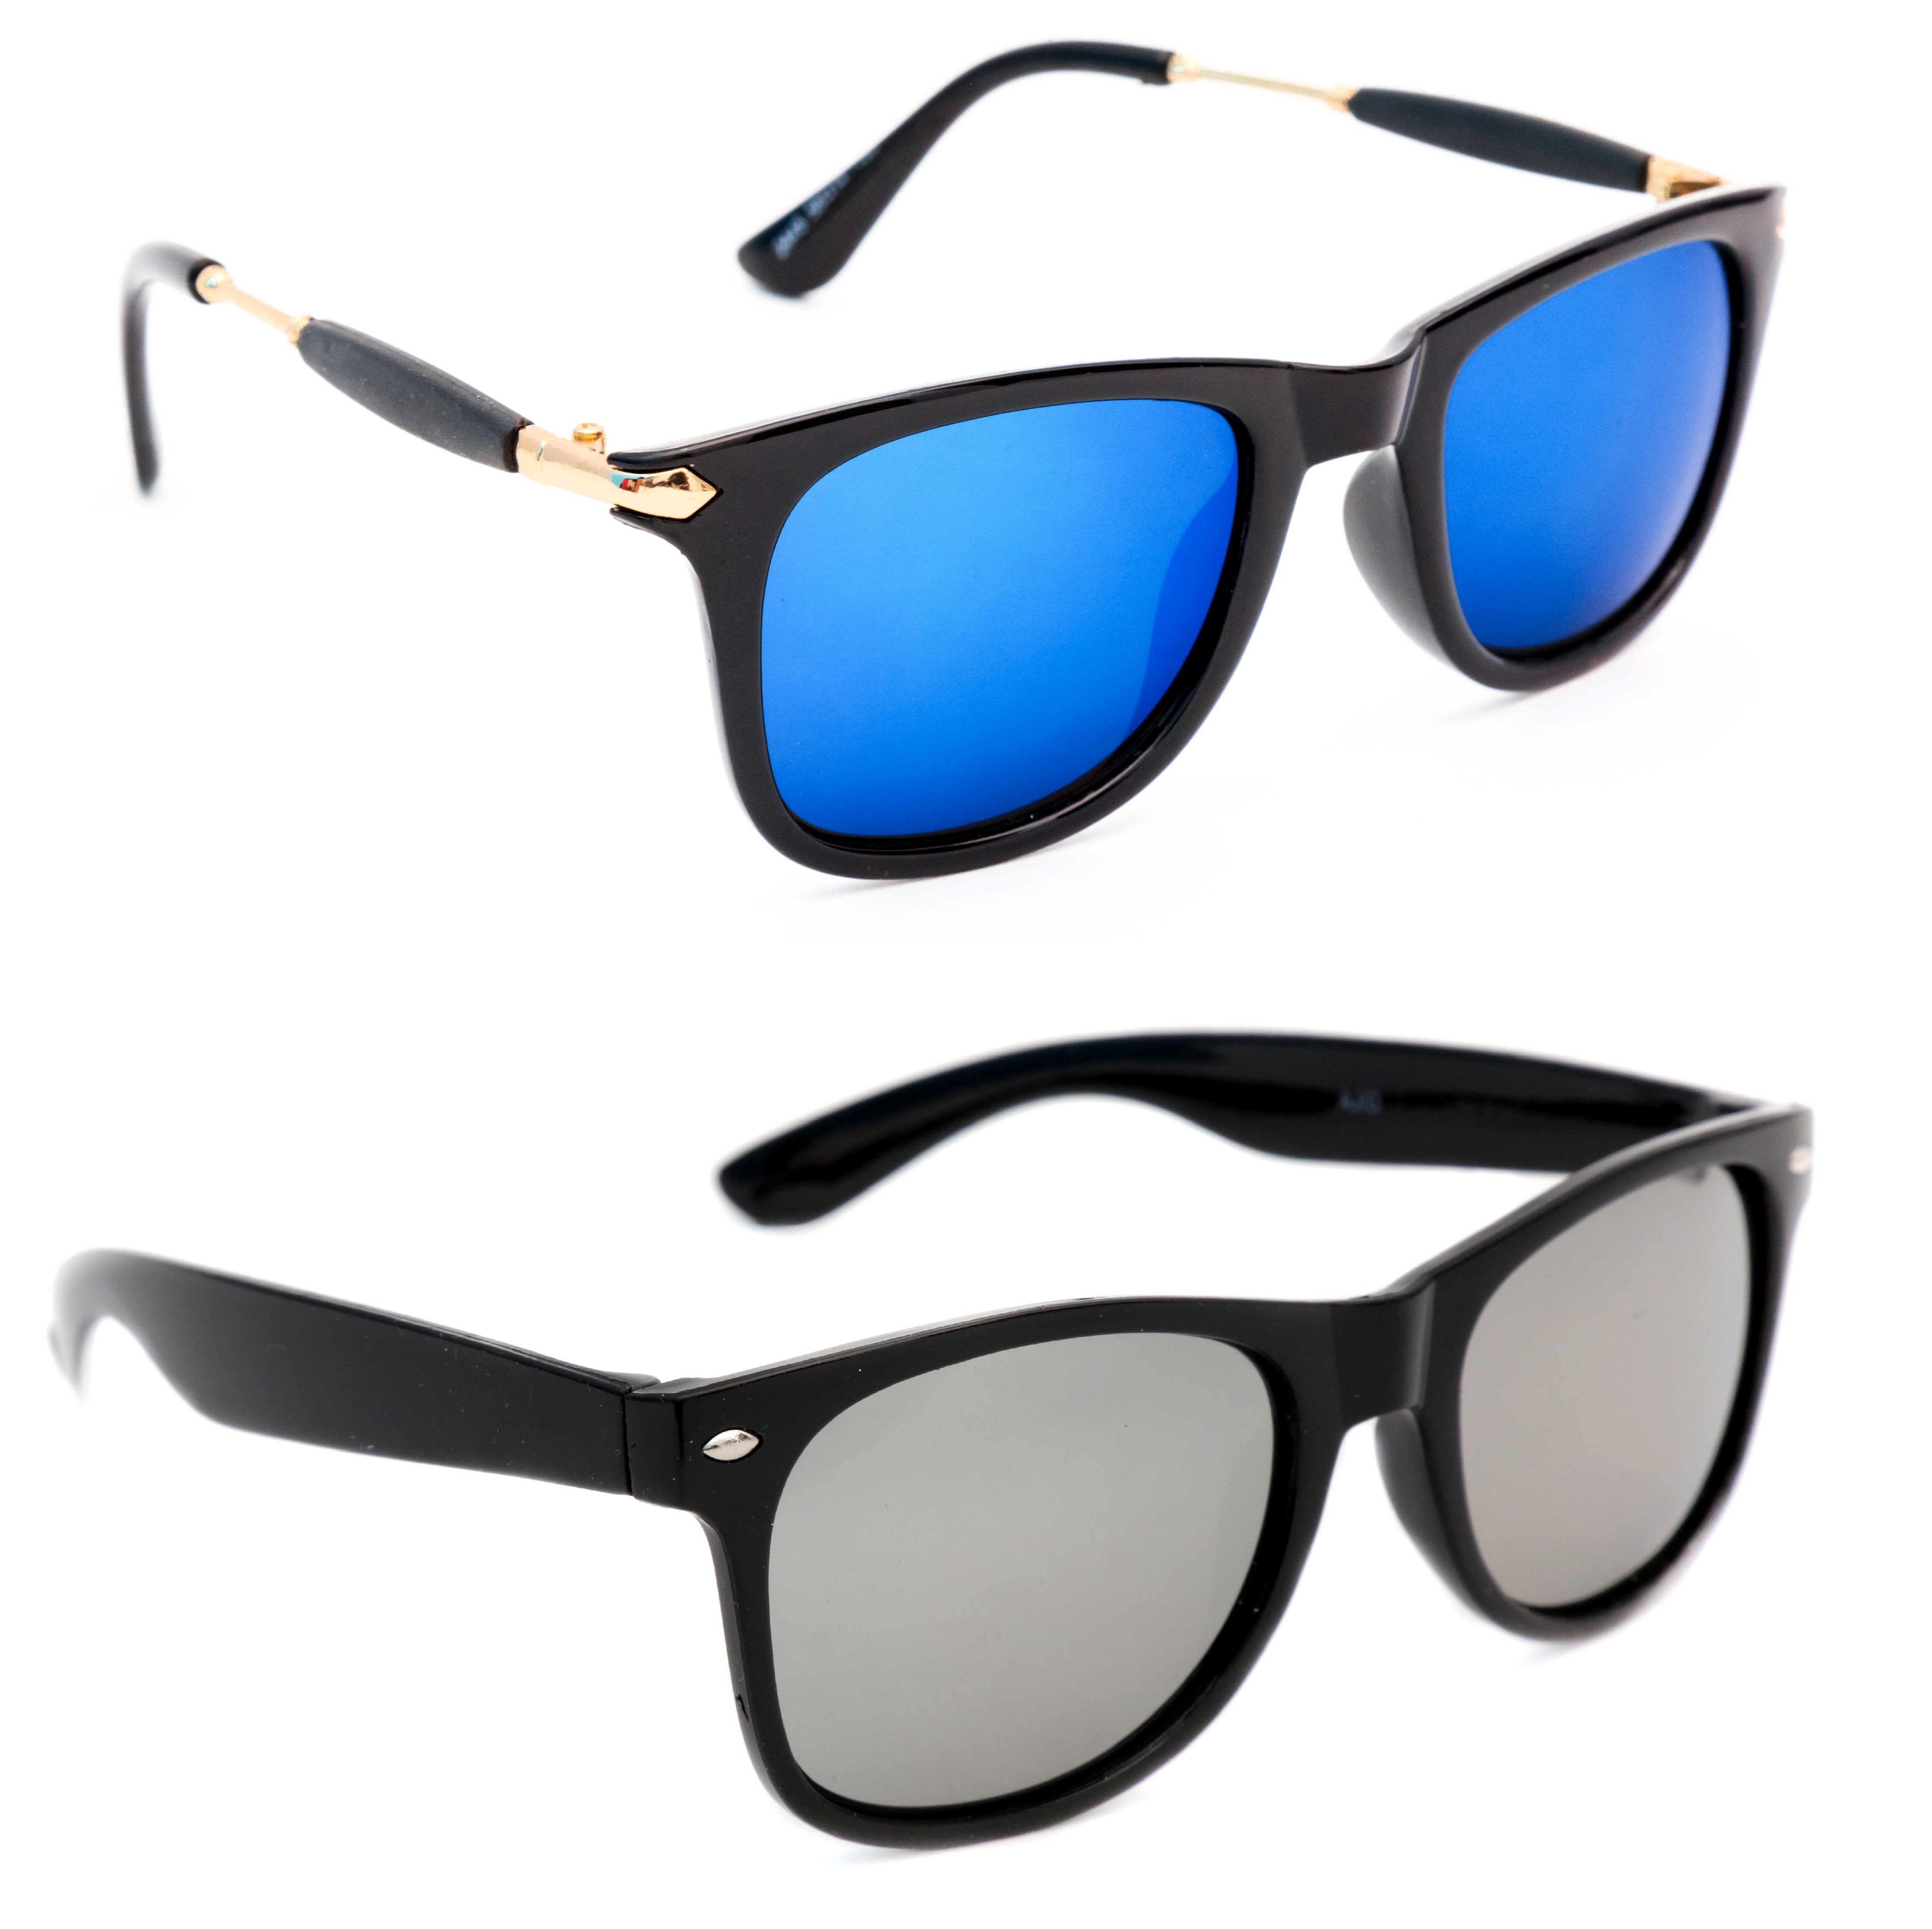 Buy TheWhoop New Combo Mirror Stylish Blue And Silver Unisex Wayfarer ...